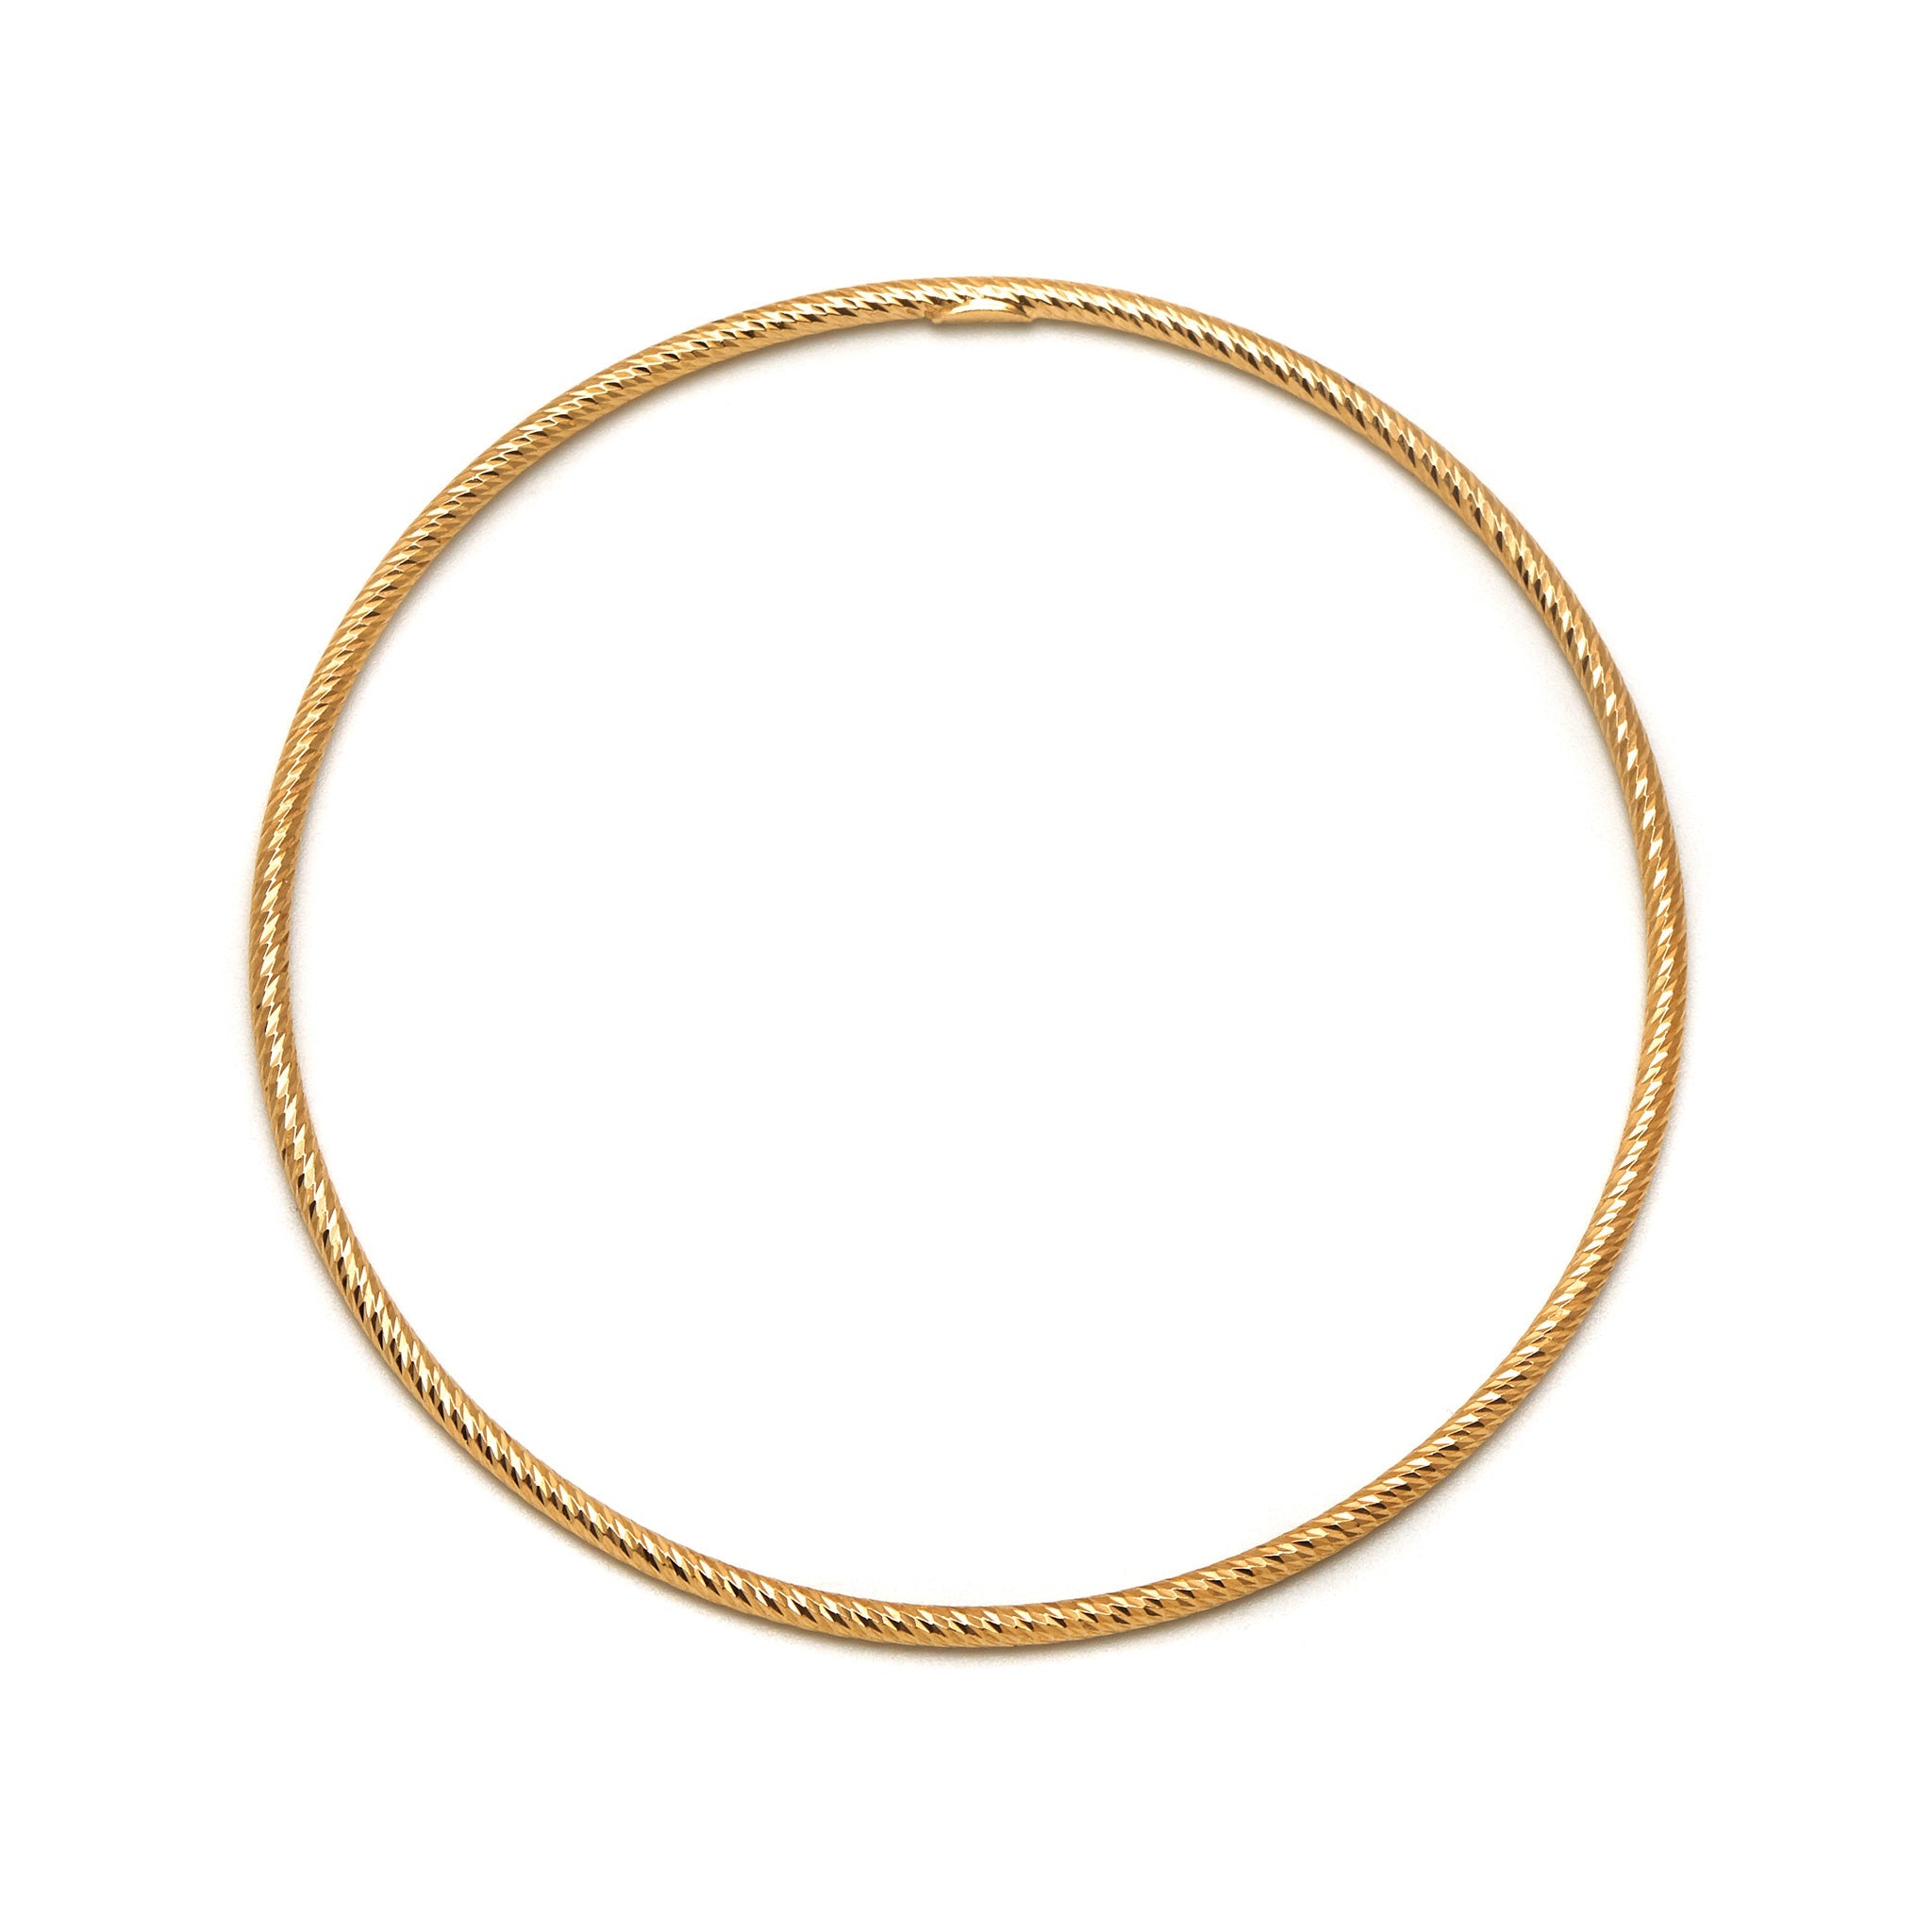 Sparkling, Glamorous Gold Gift-Set for Women, UK. Sustainable silver + gold  plating – The Hoop Station